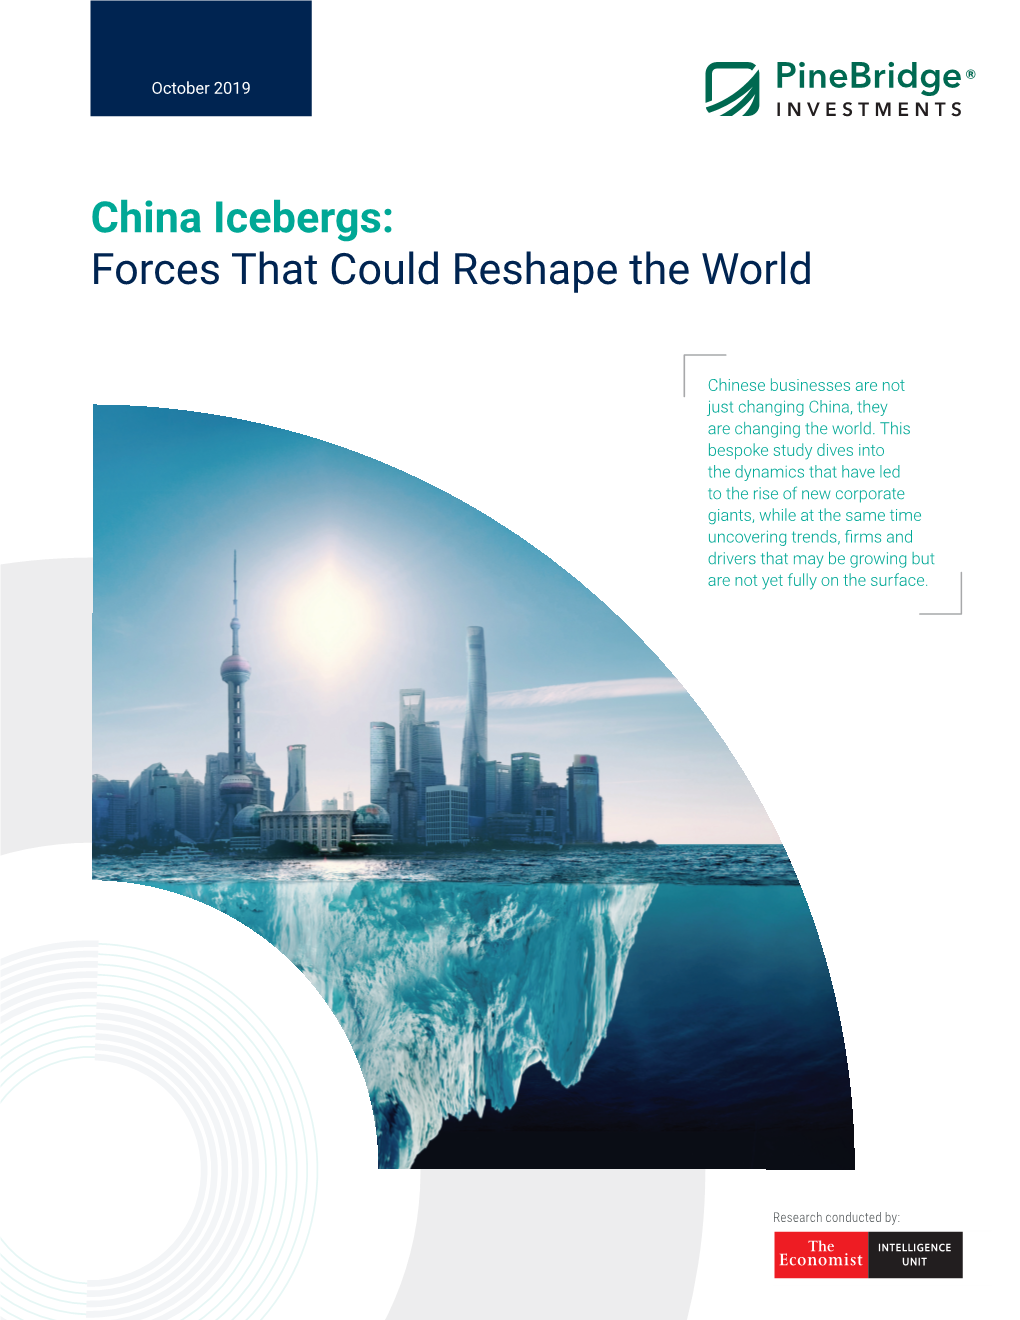 China Icebergs: Forces That Could Reshape the World